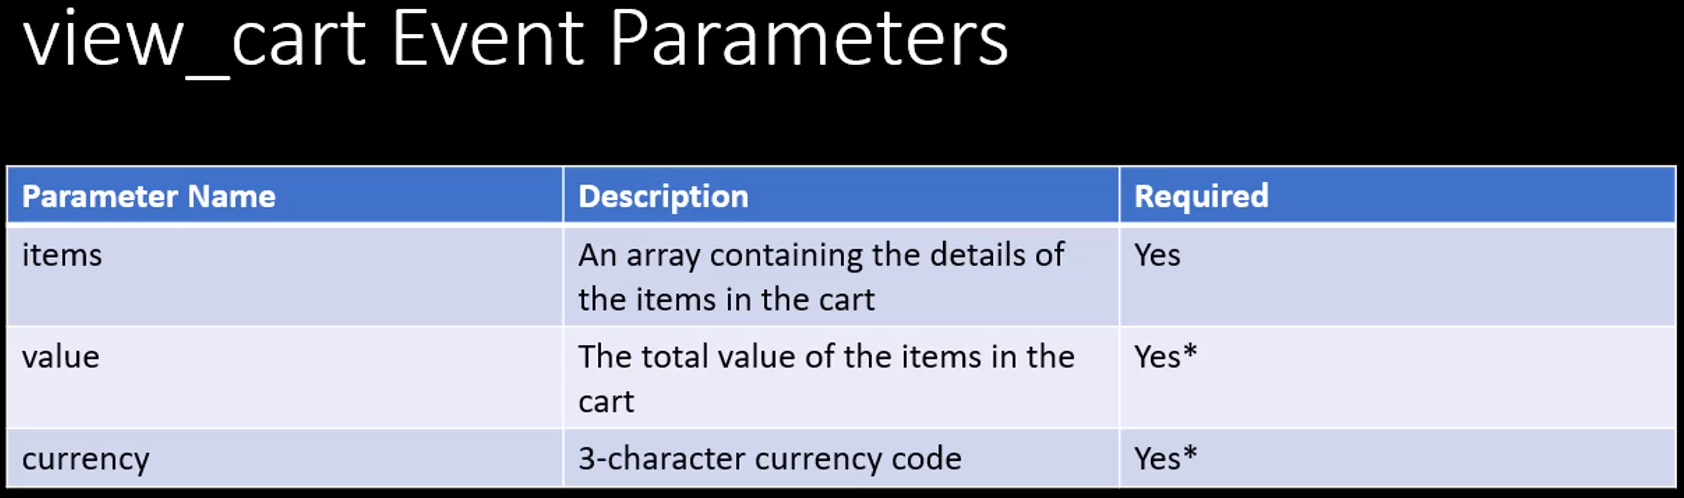 view_cart-event-parameters